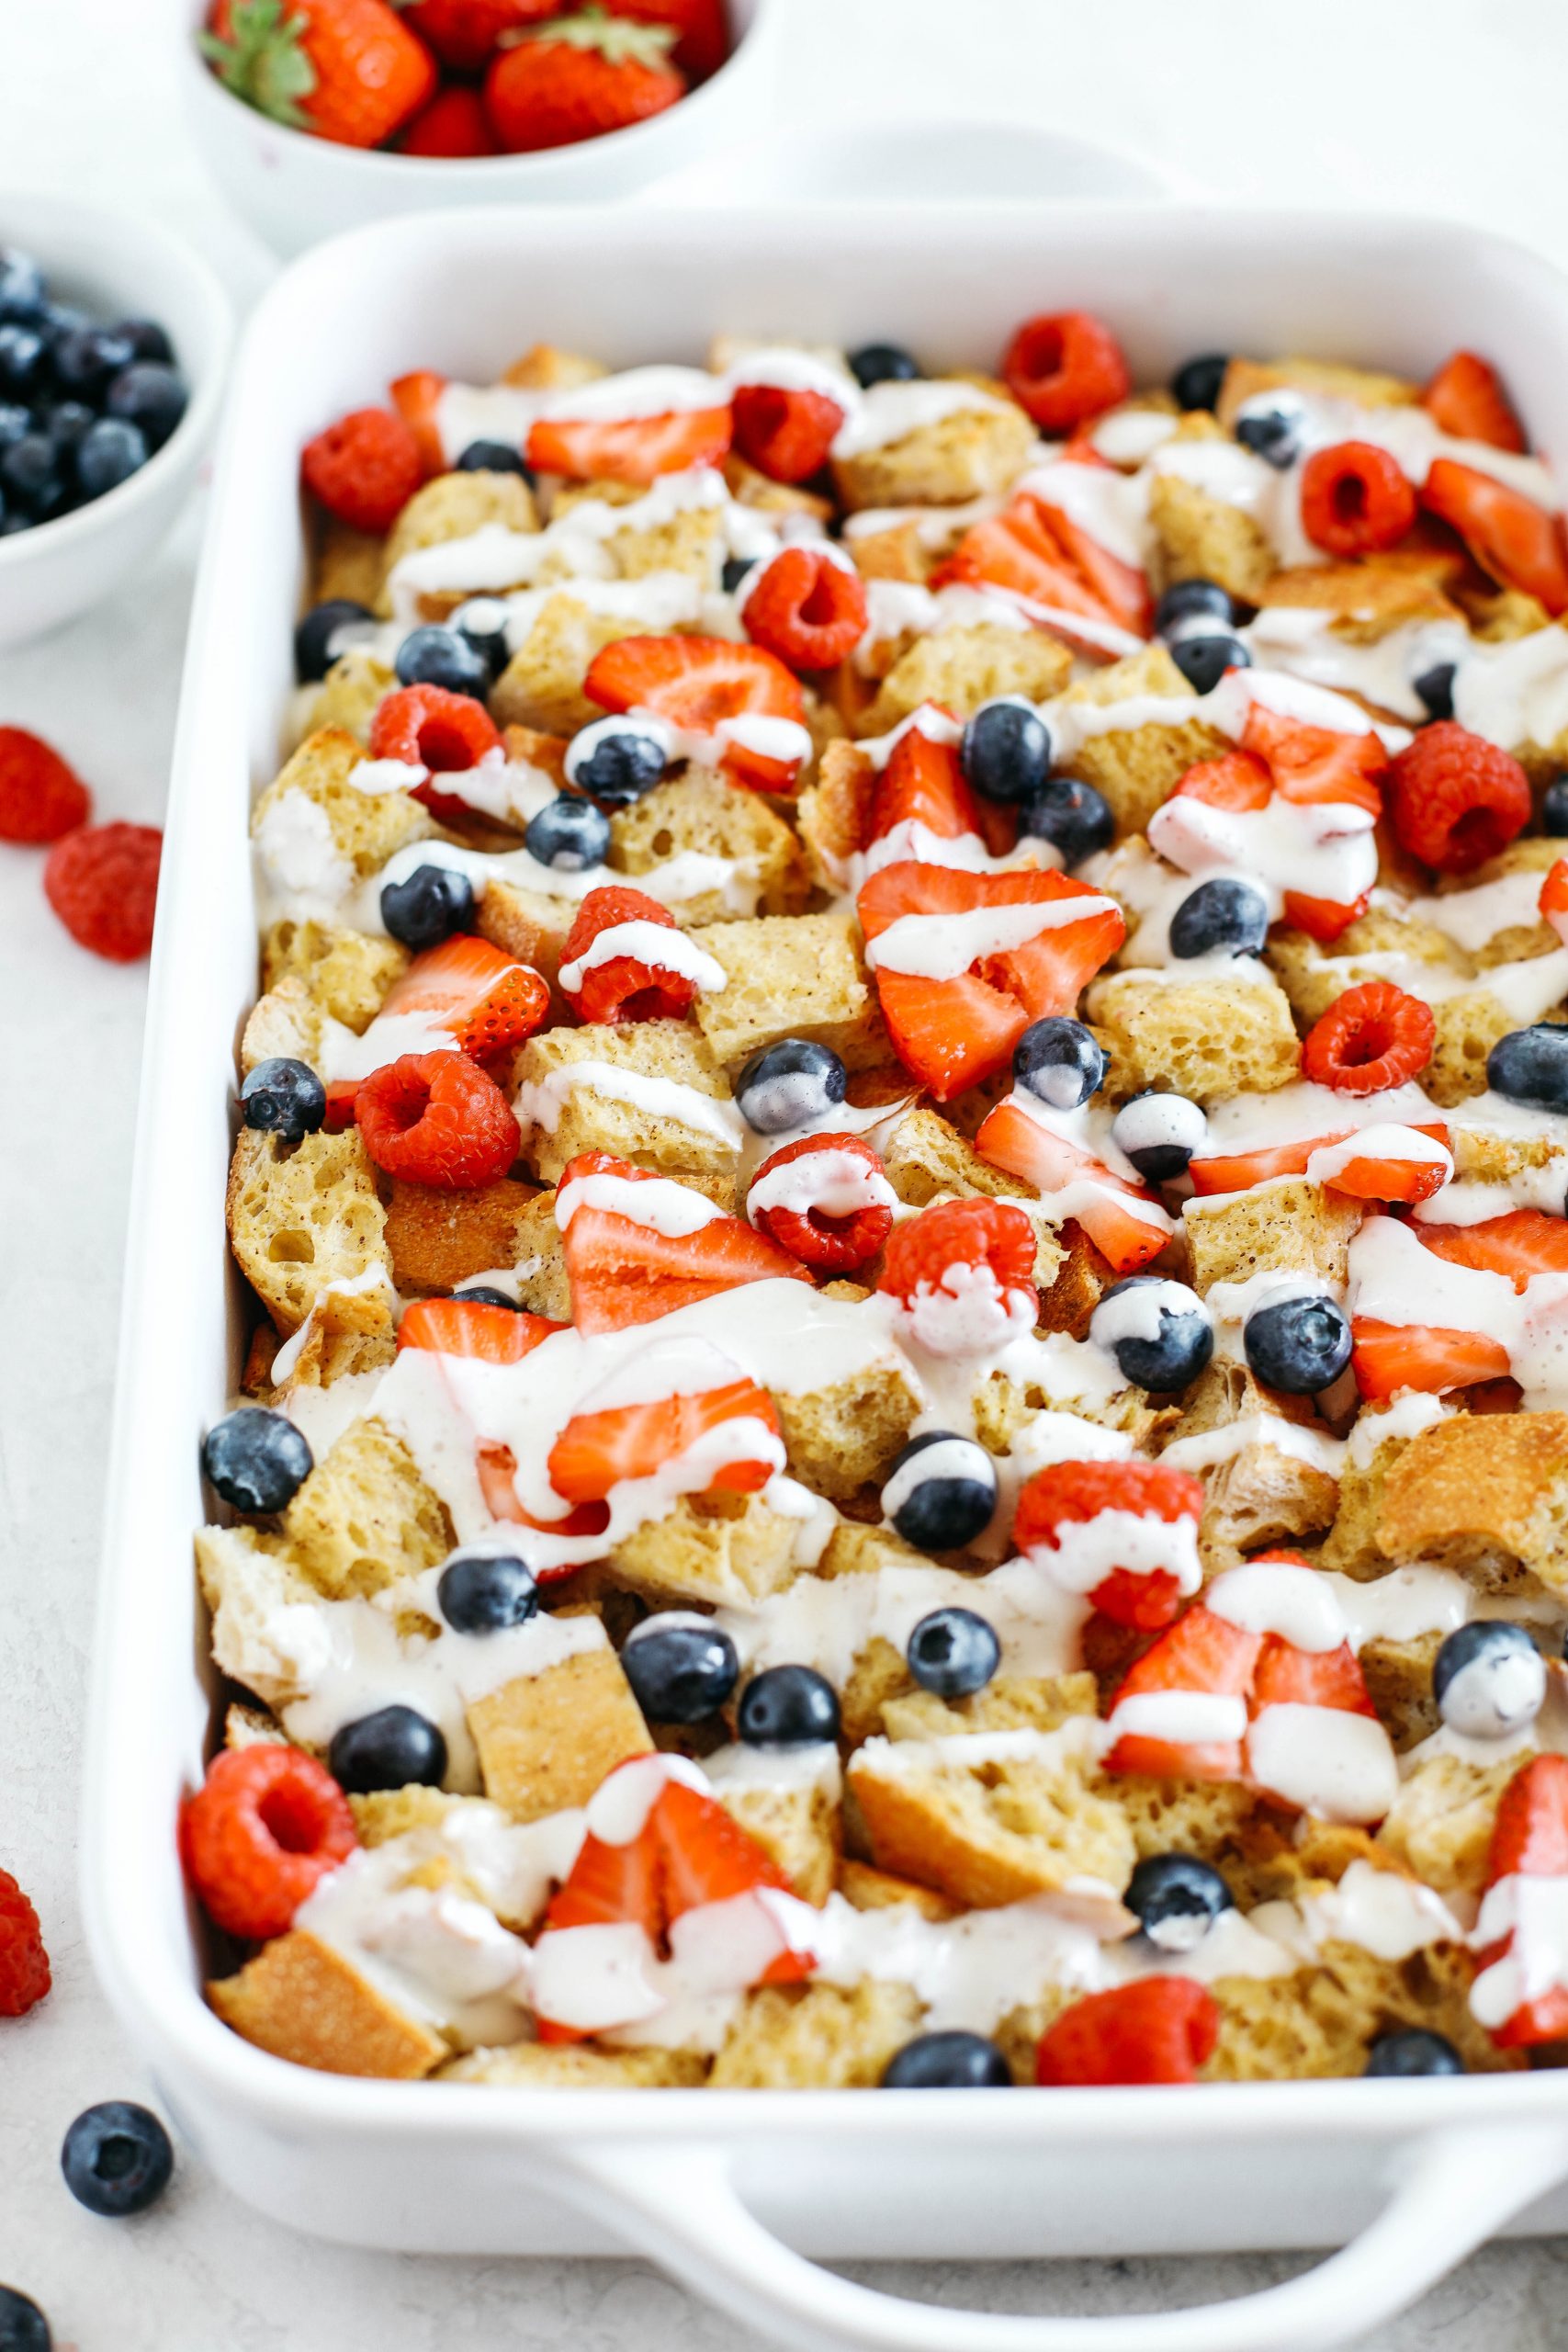 Warm and flavorful Mixed Berry French Toast Casserole with a delicious cream cheese drizzle that can easily be made the night before for the perfect morning breakfast!